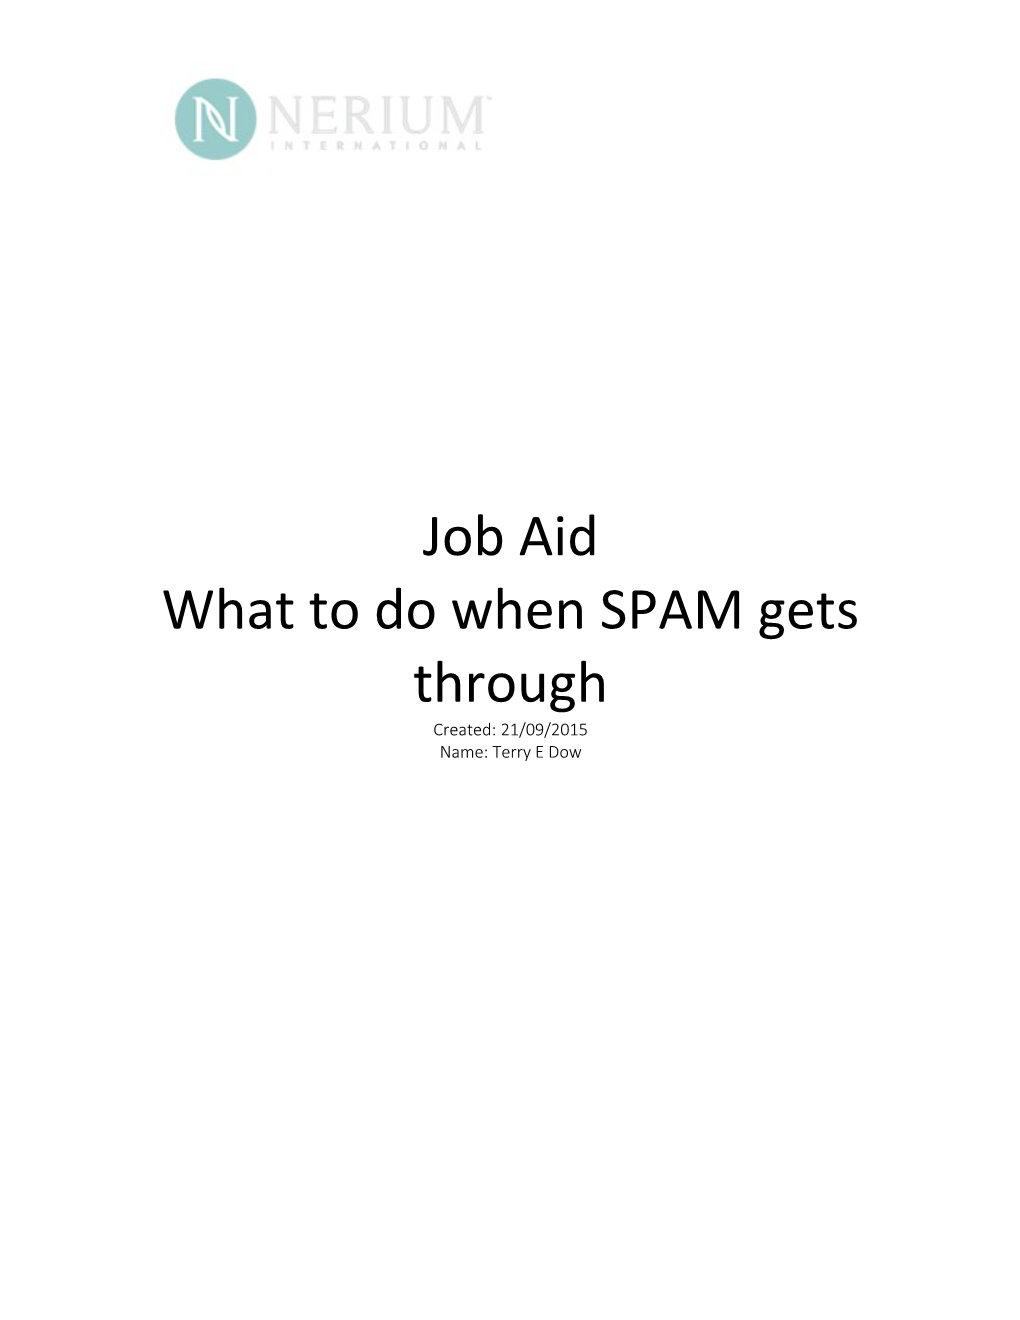 What to Do When SPAM Gets Through